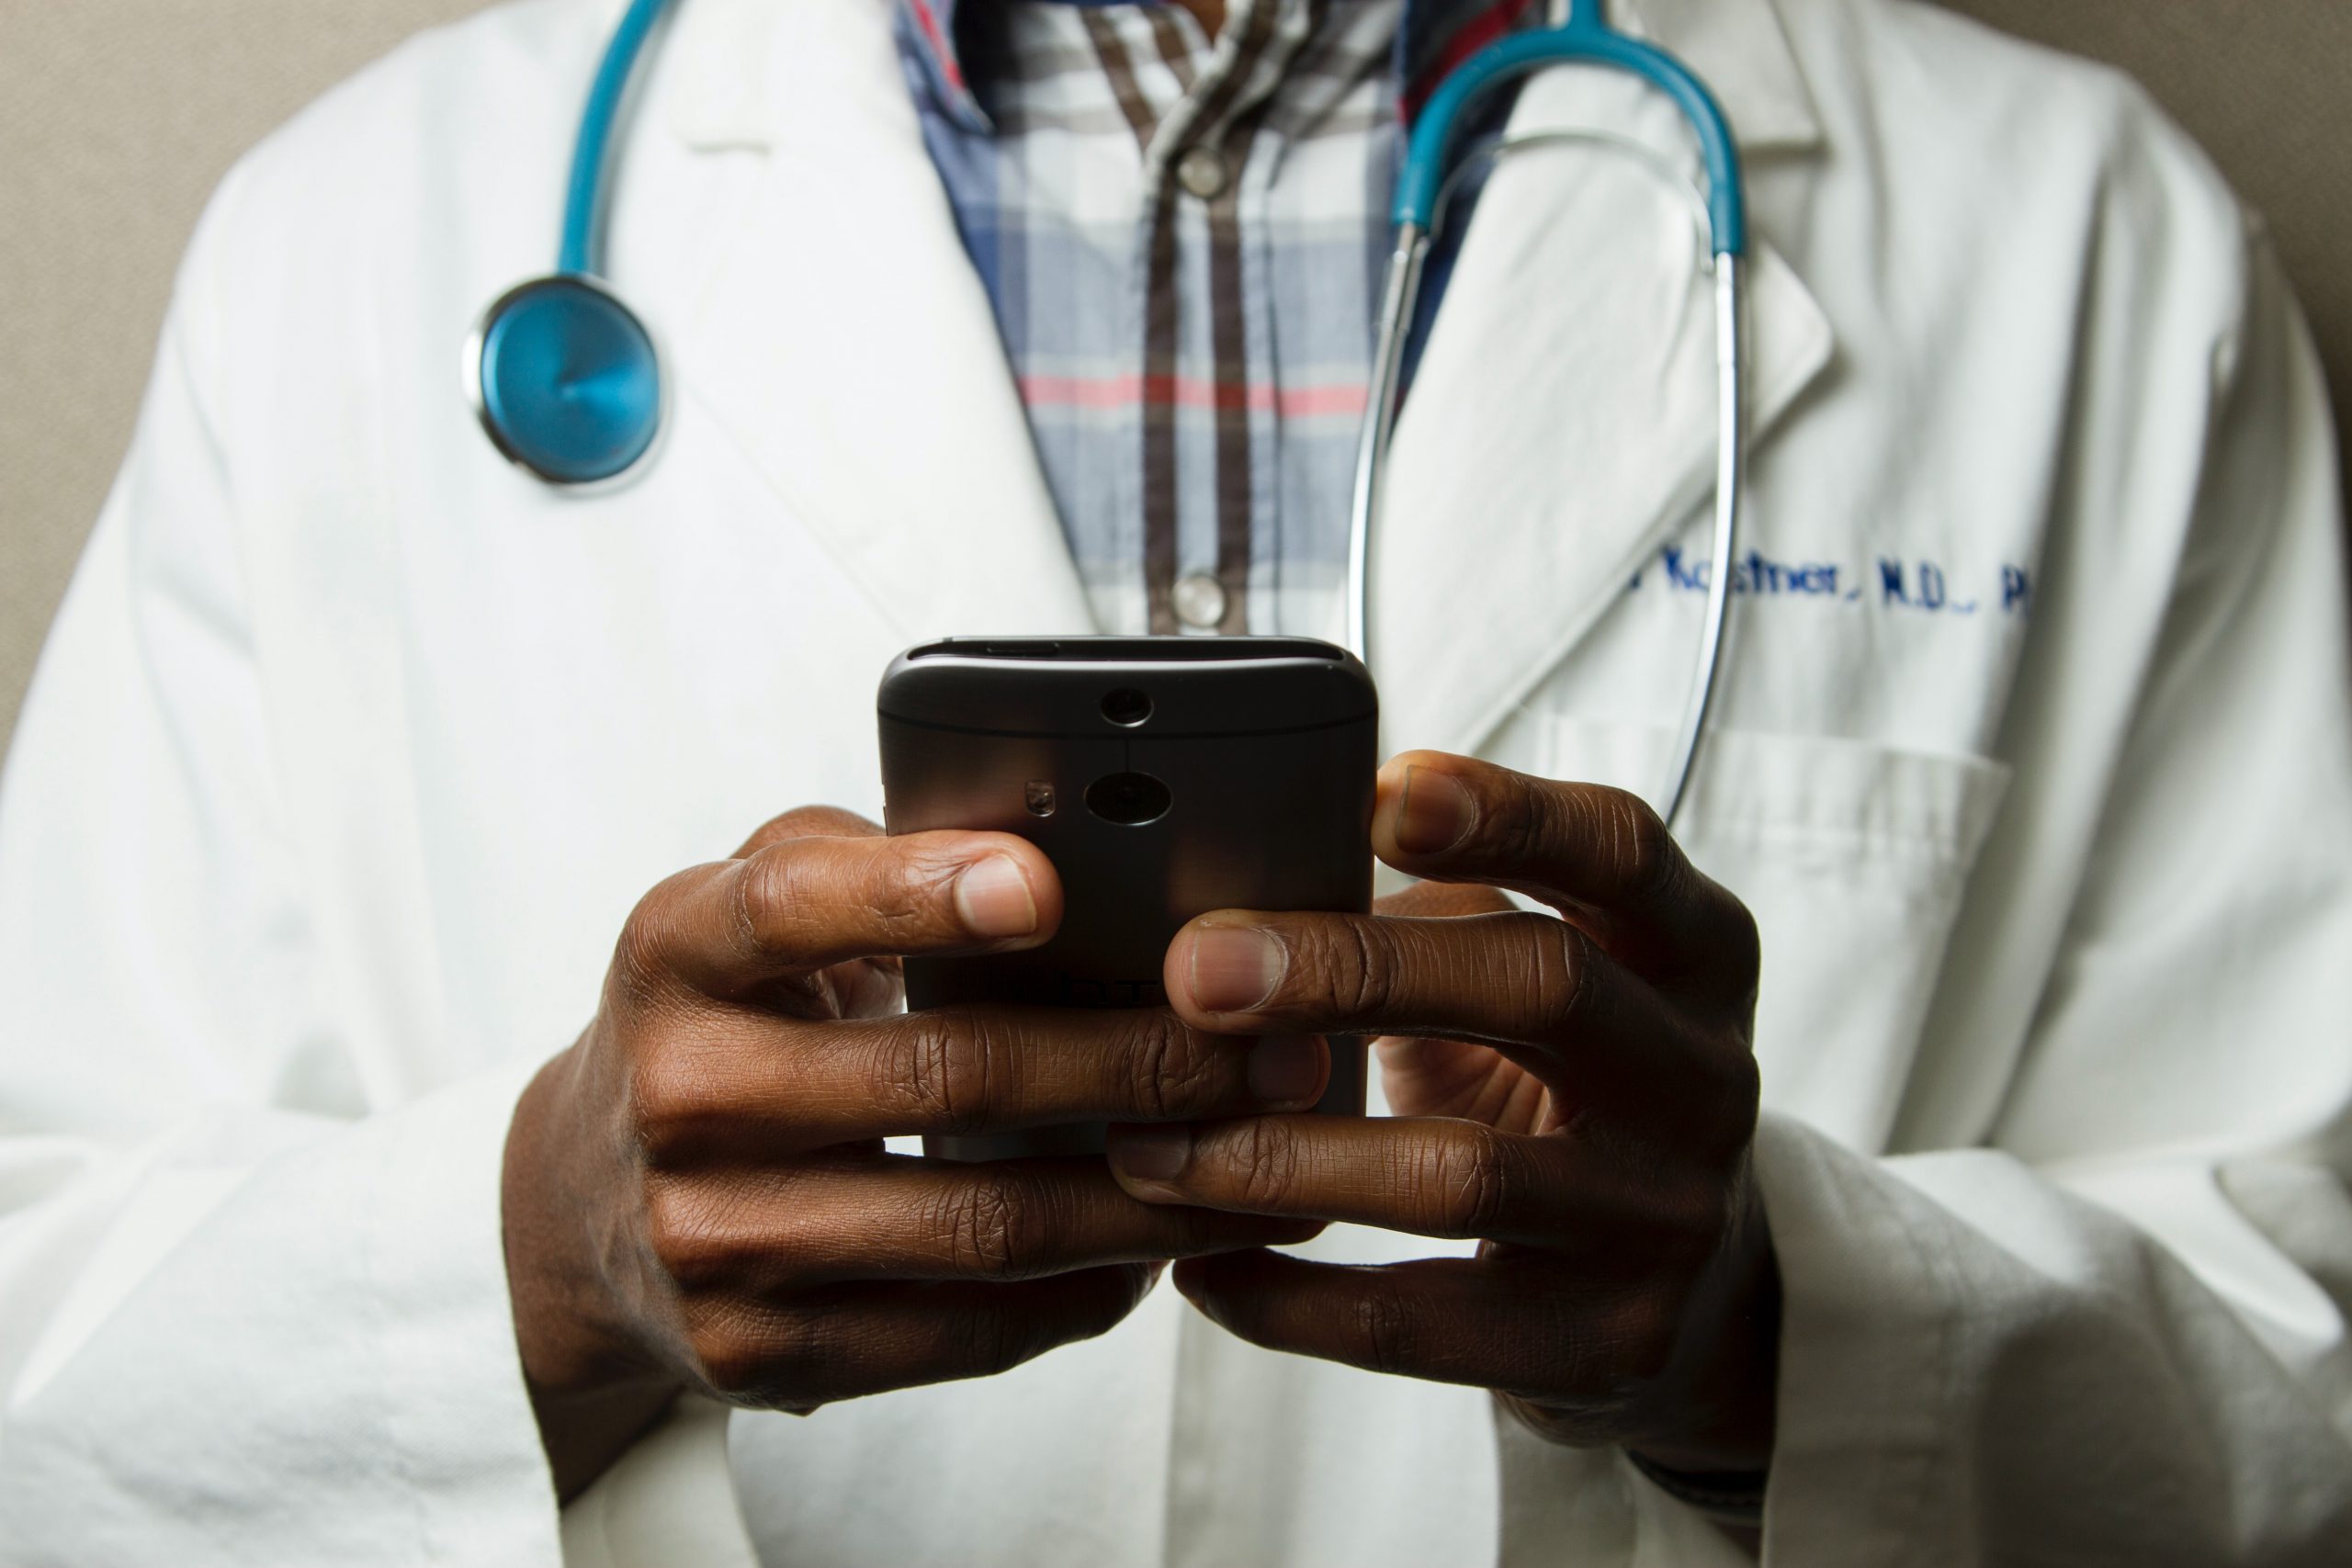 in article about careers, a doctor holding a smartphone